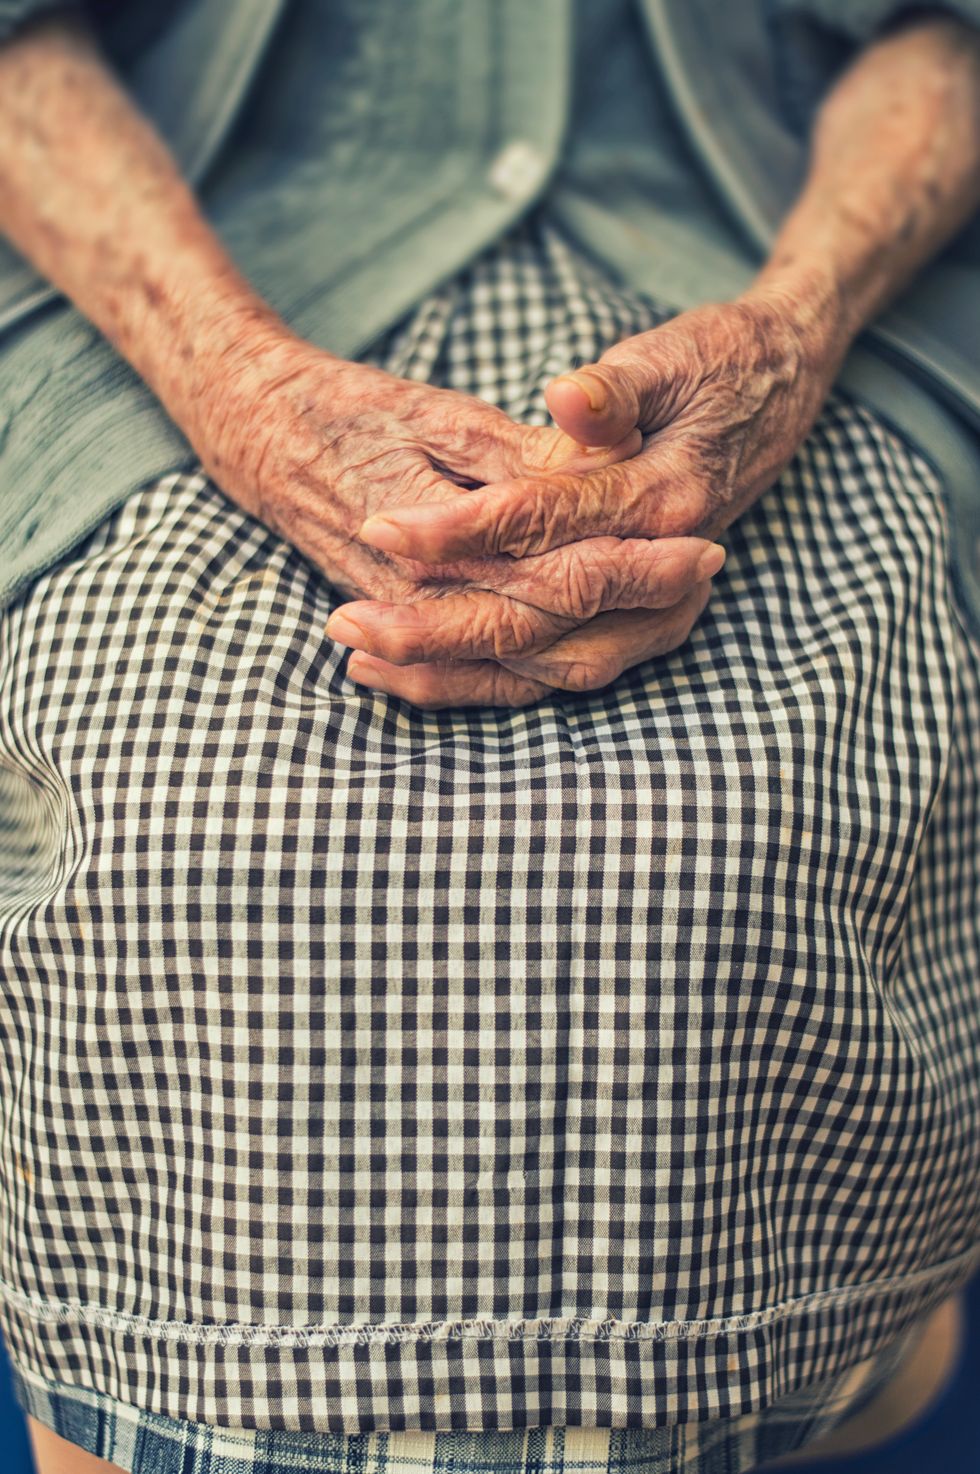 6 Valuable Lessons About Life Working With Elderly People Has Taught Me